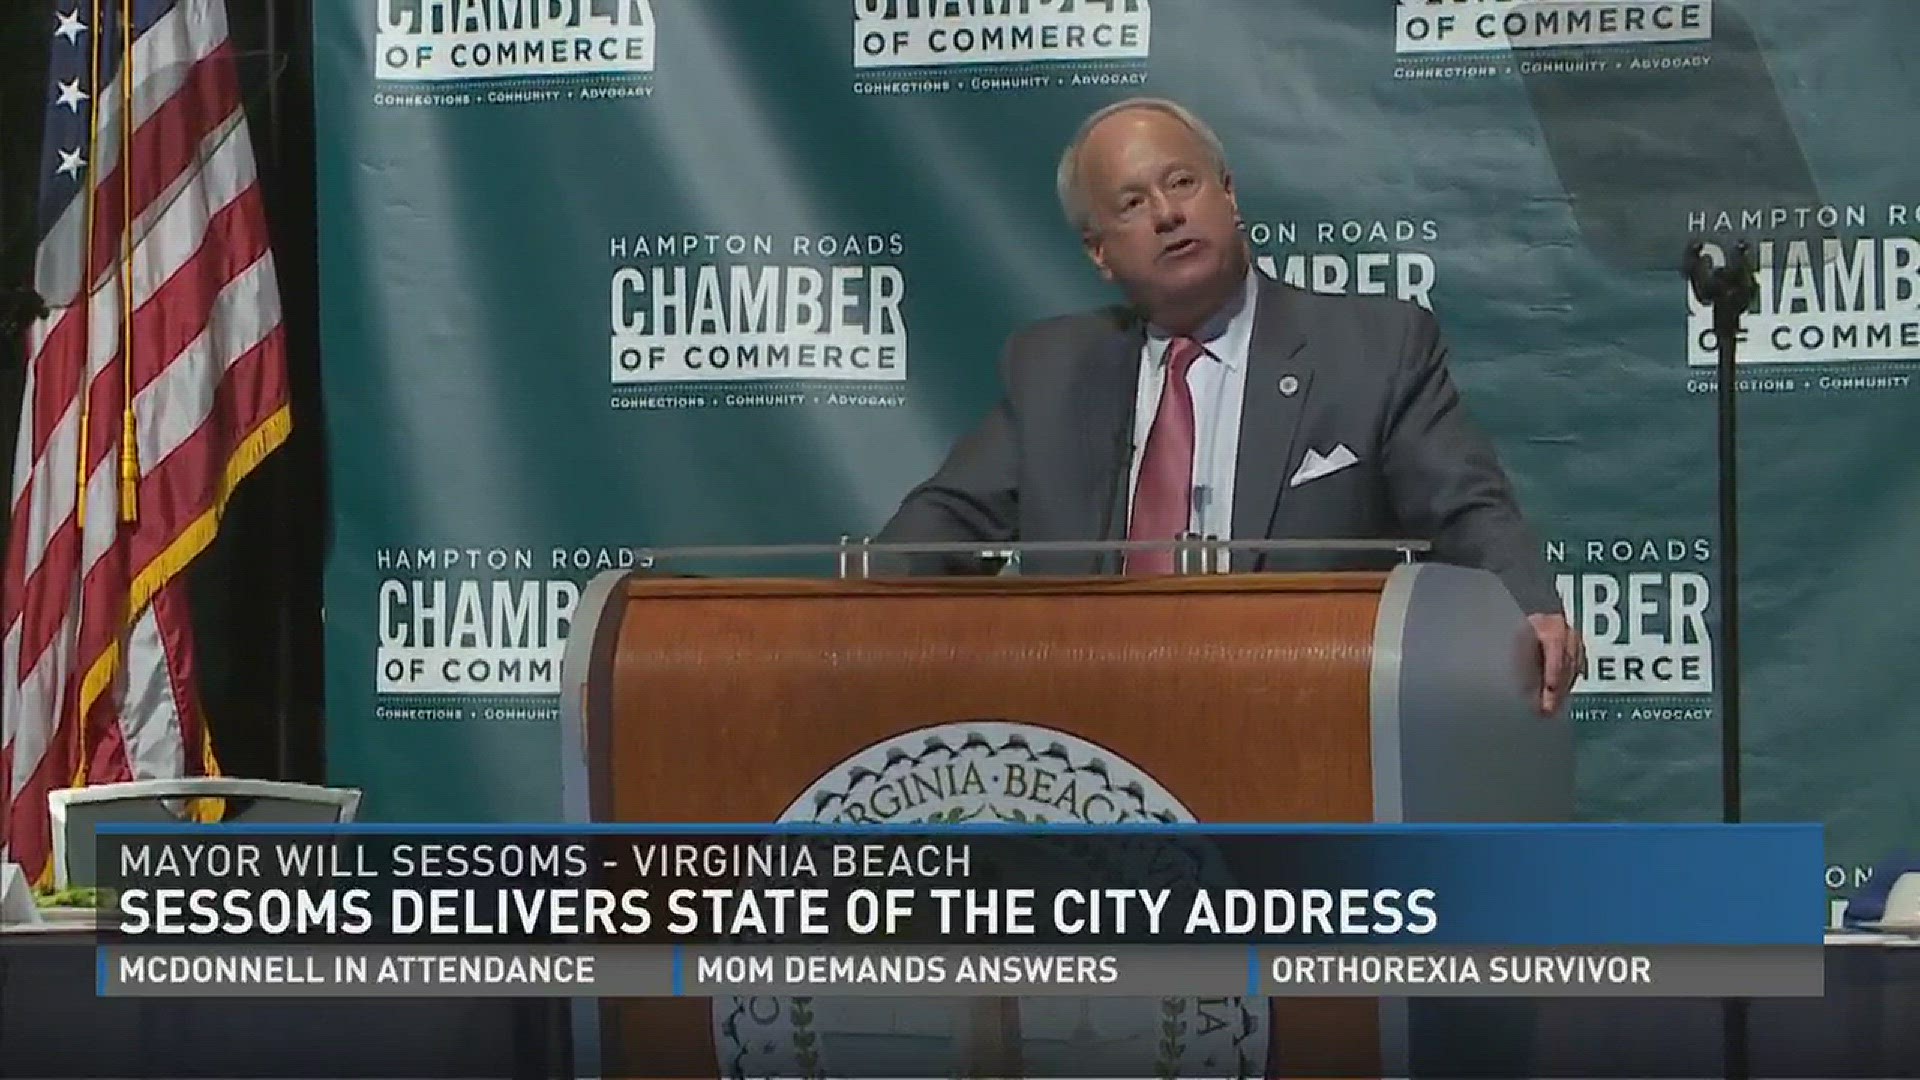 Sessons delivers state of the city address | 13newsnow.com